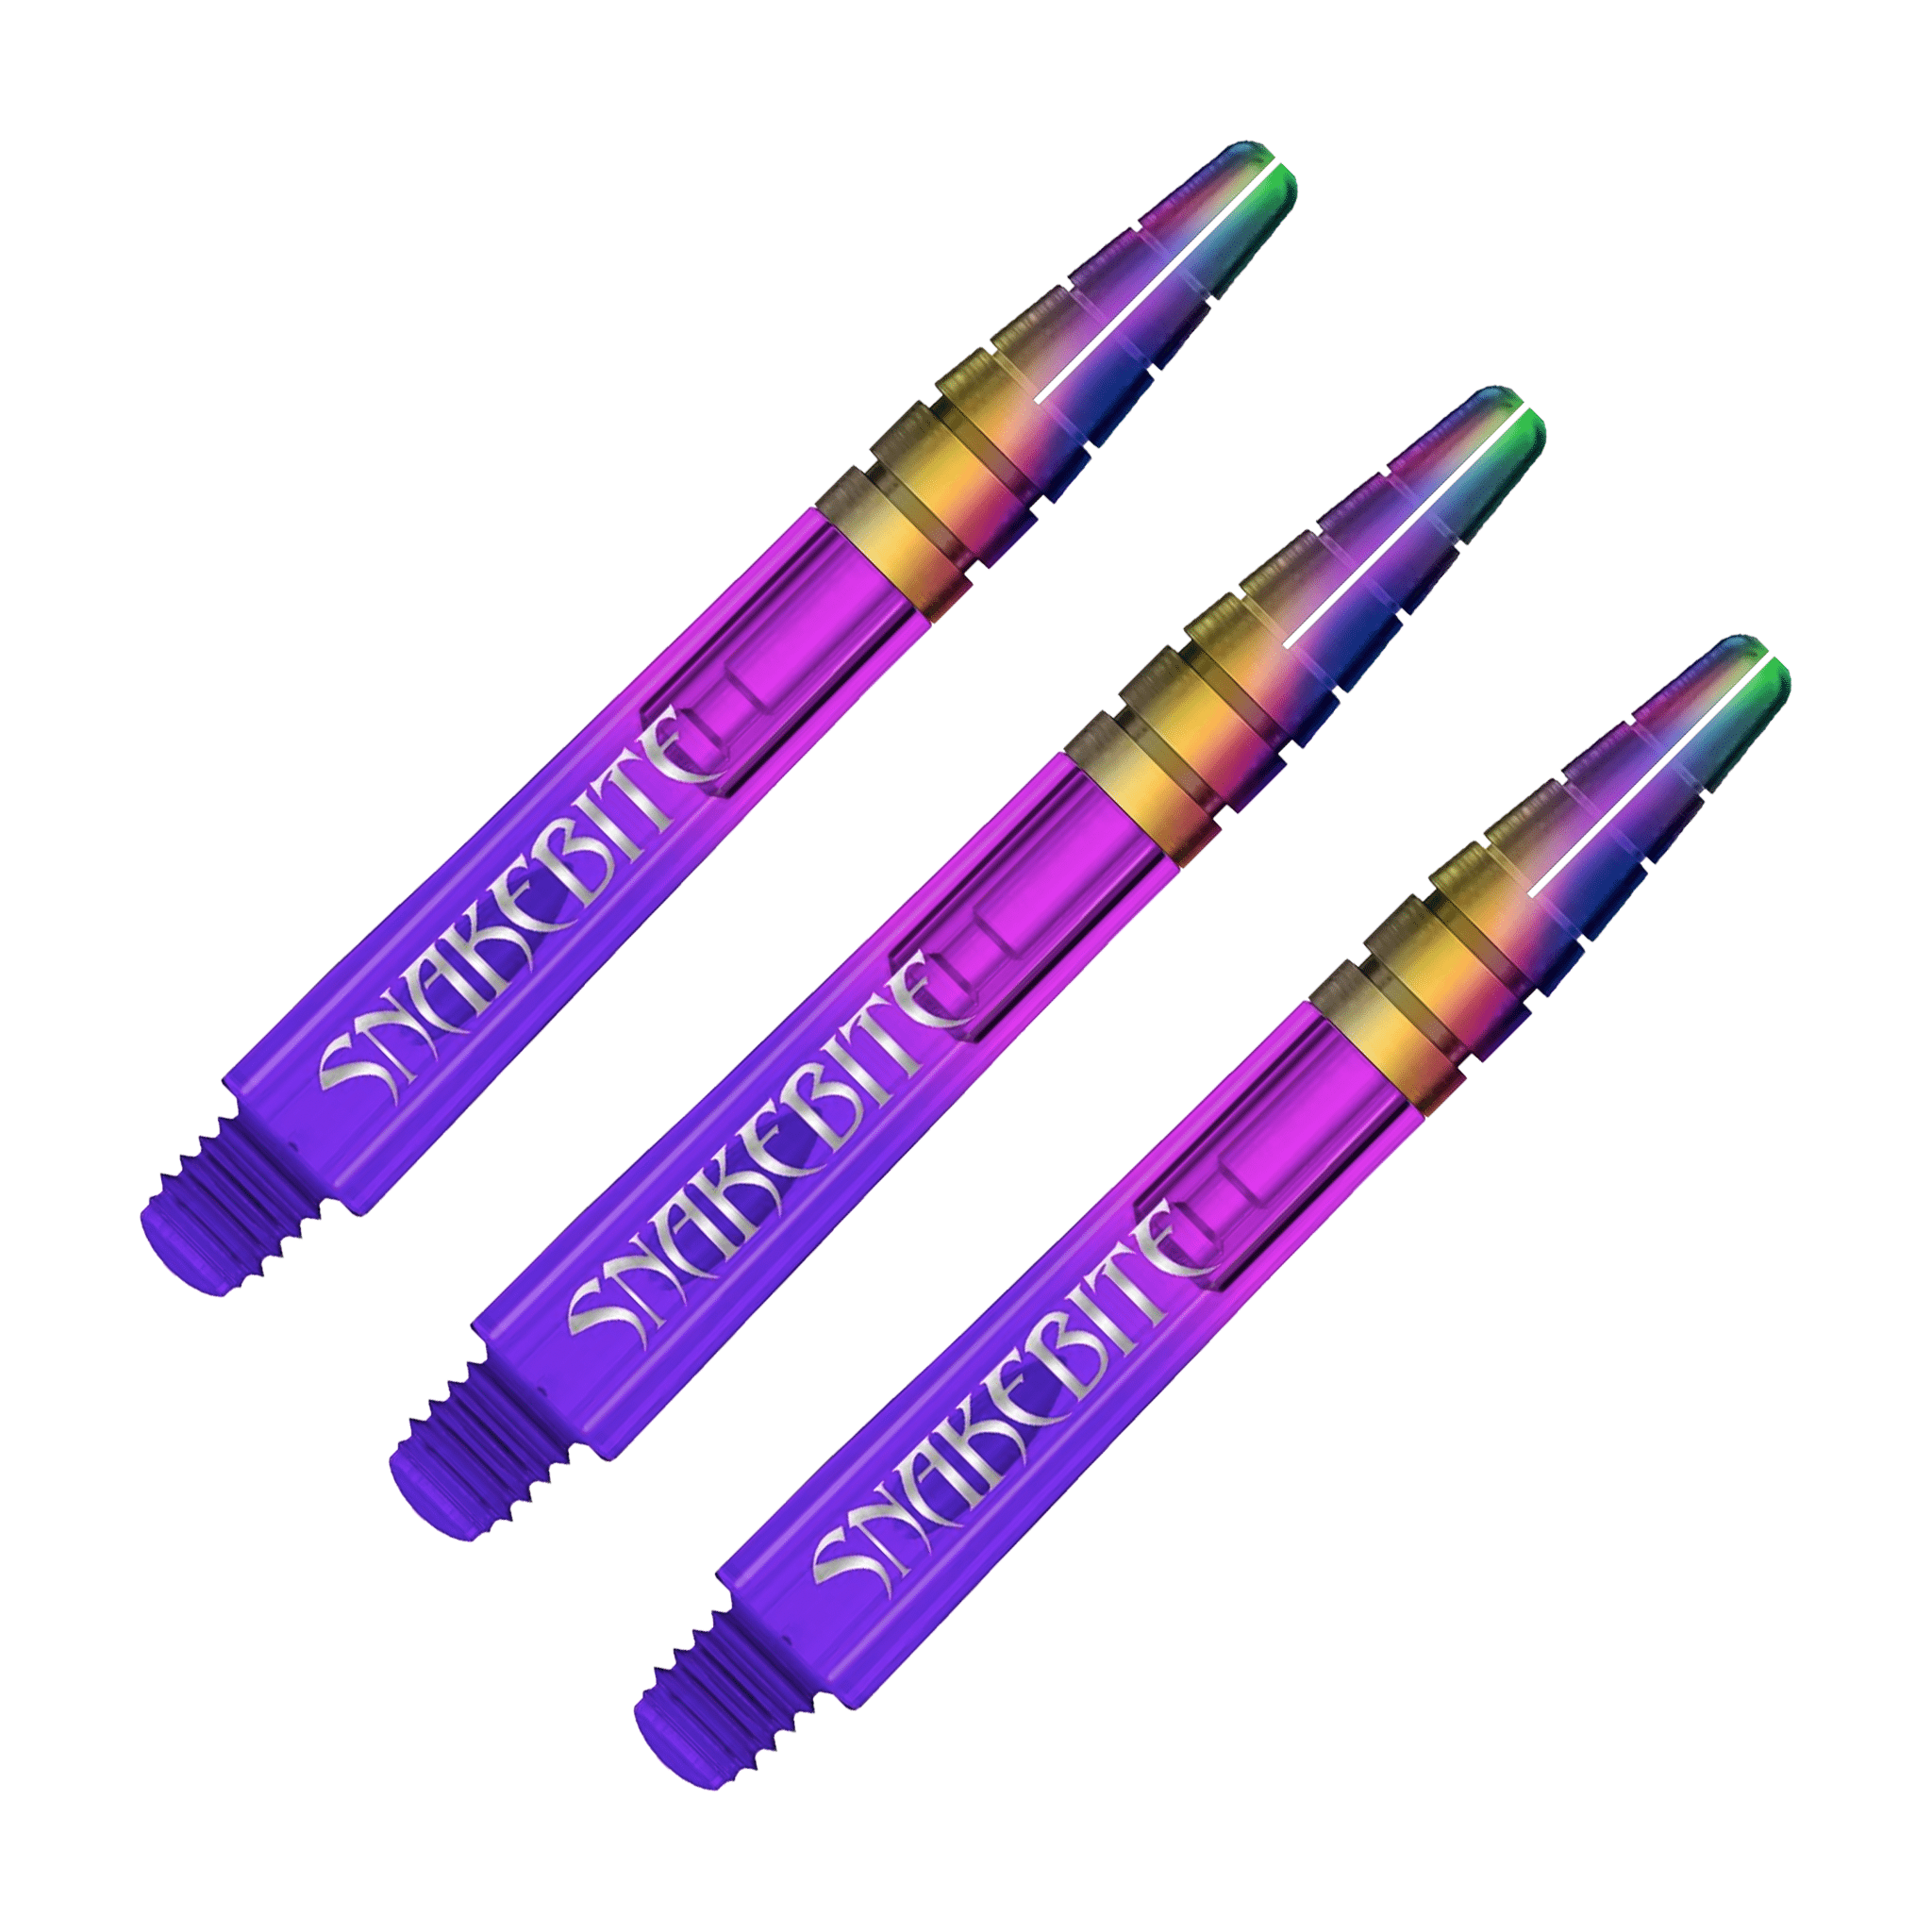 Red Dragon Peter Wright Snakebite Nitrotech - Polycarbonate Dart Shafts Shafts